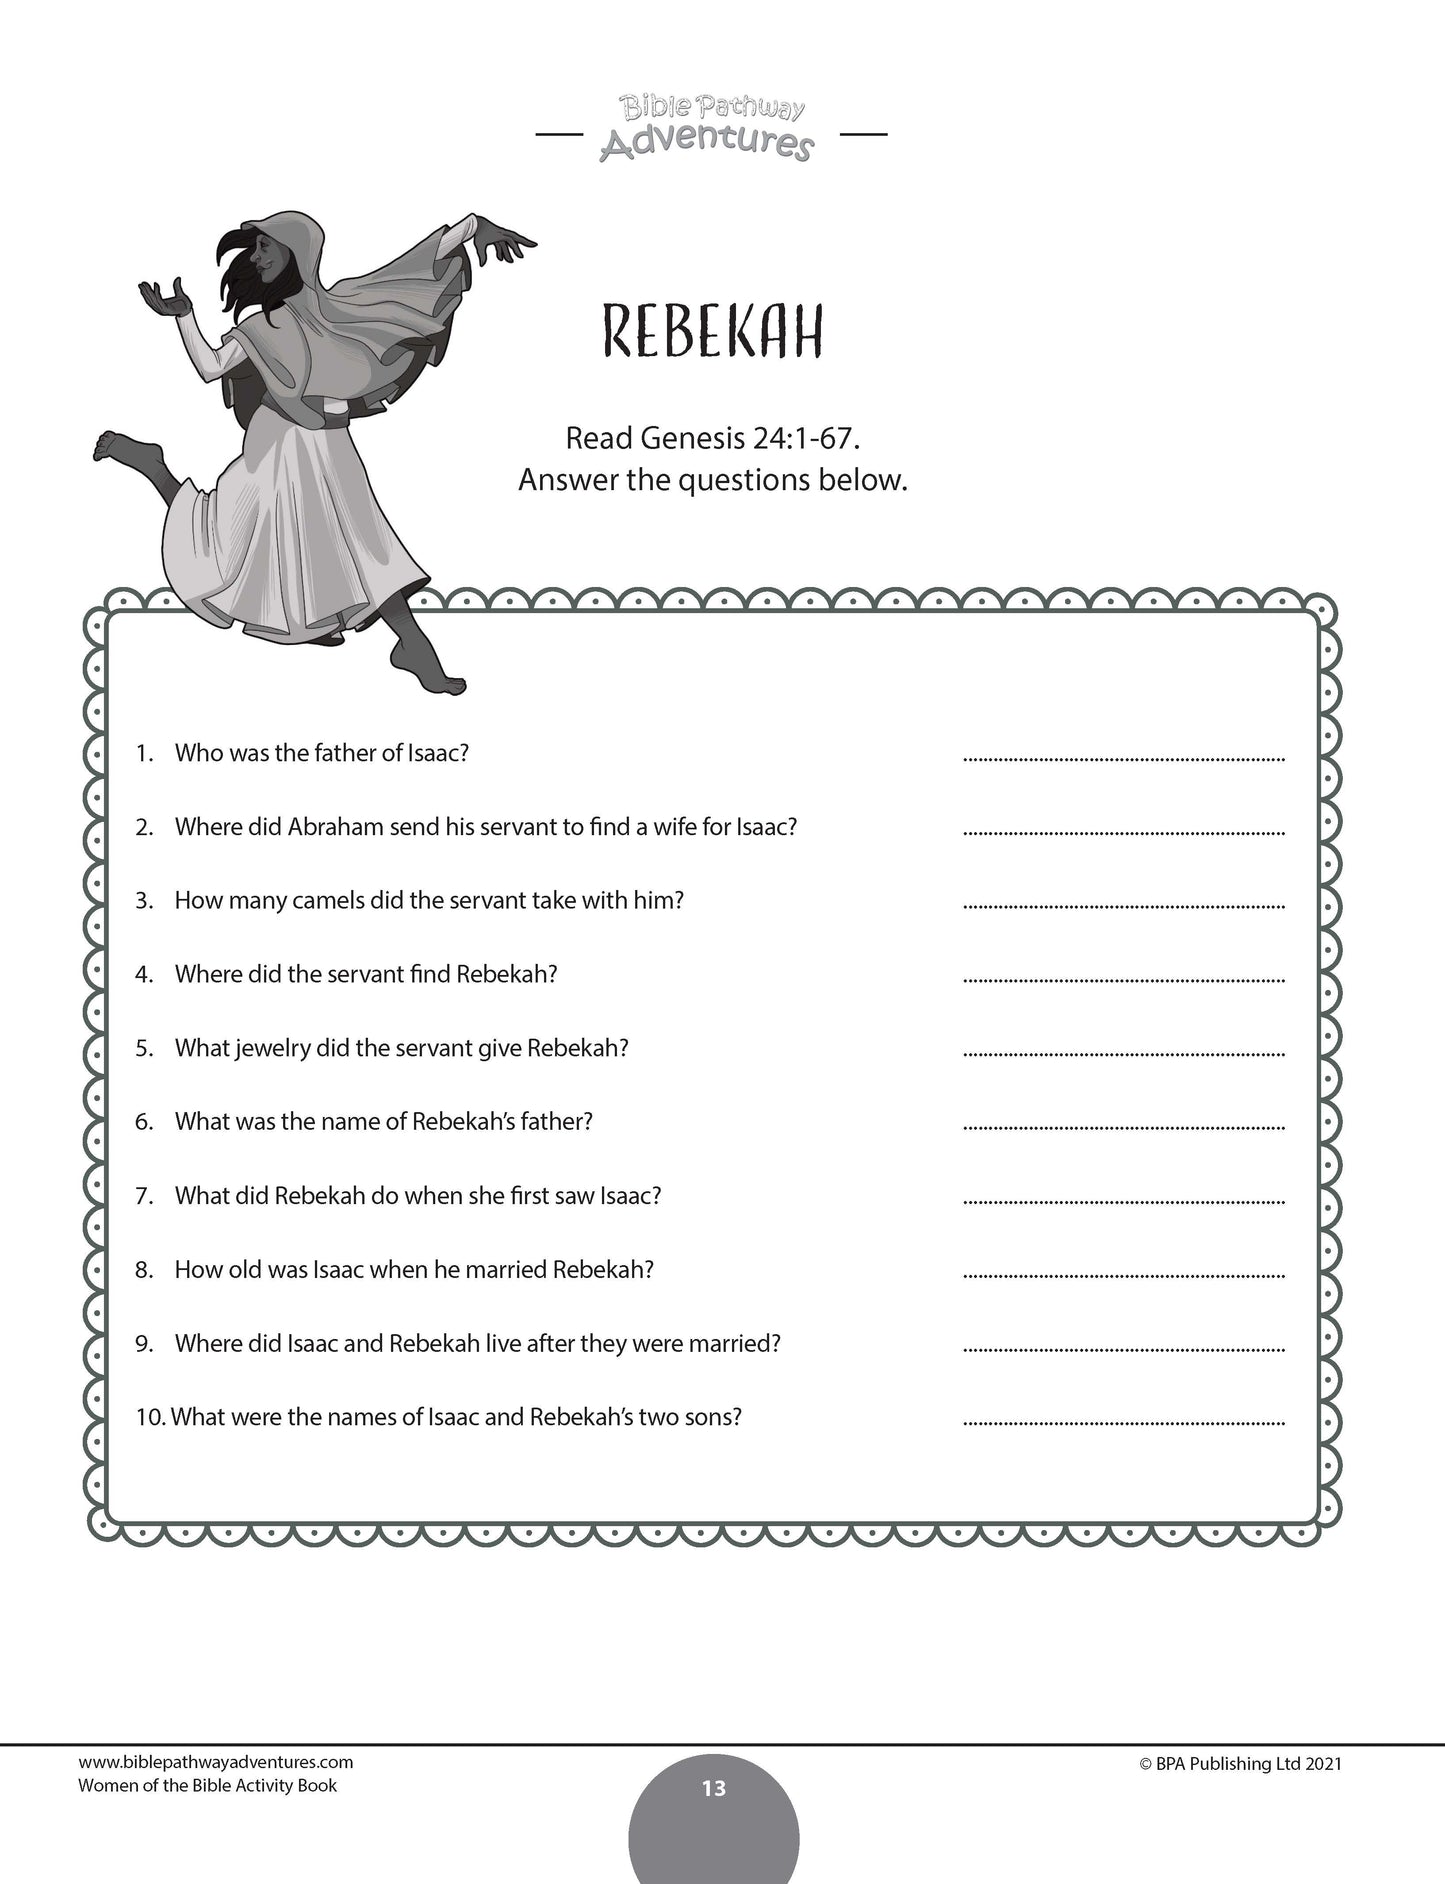 Women of the Bible Activity Book